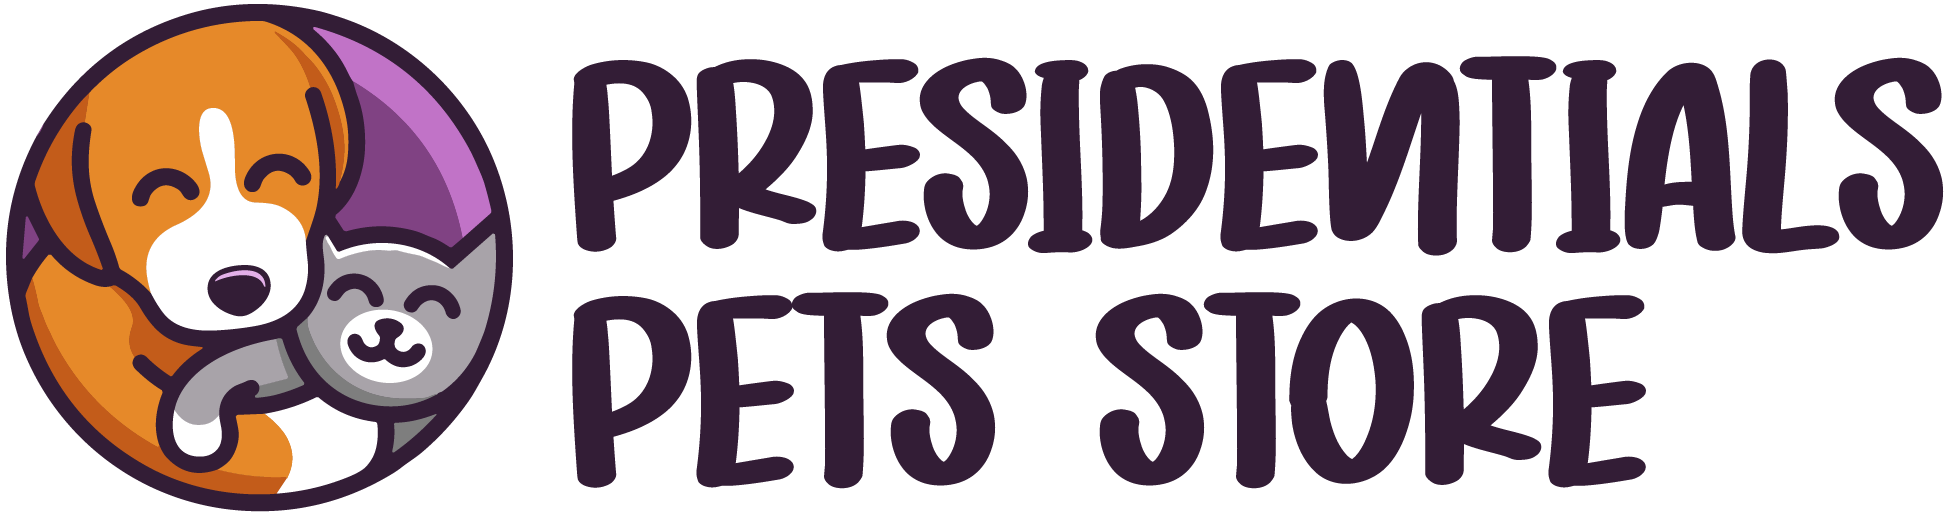 Presidentials Pets Store